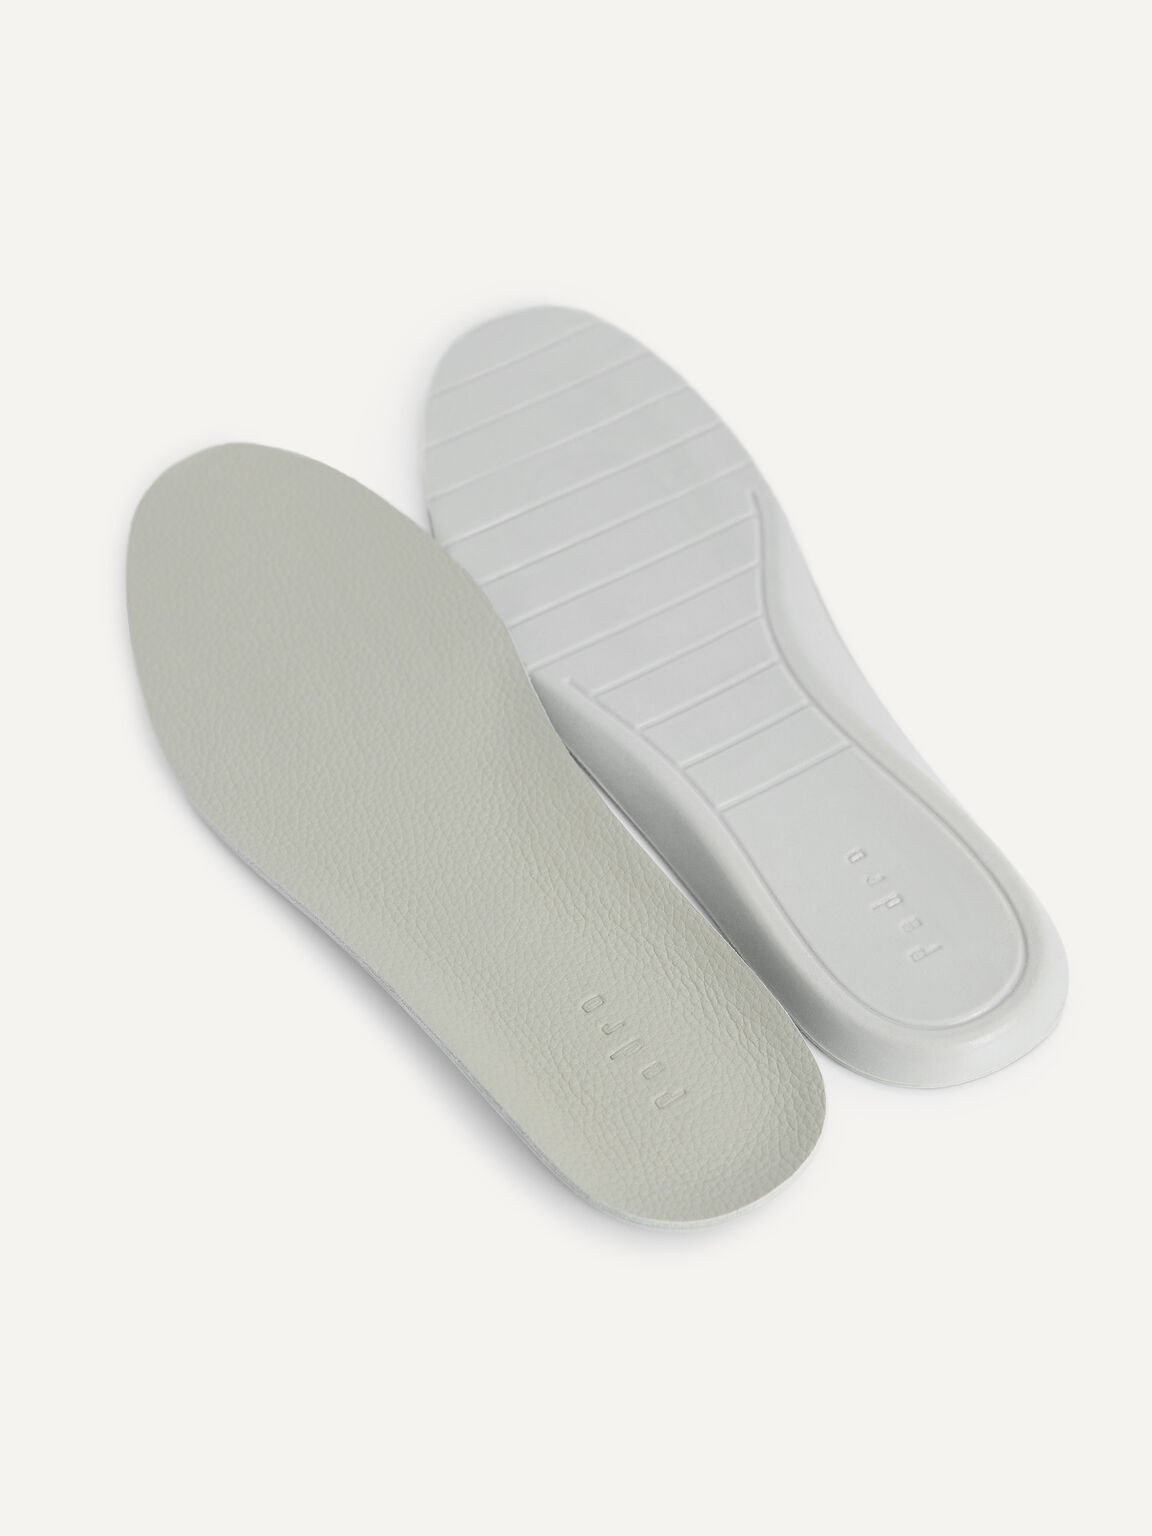 Sports Cushion Leather Insole, Light Grey